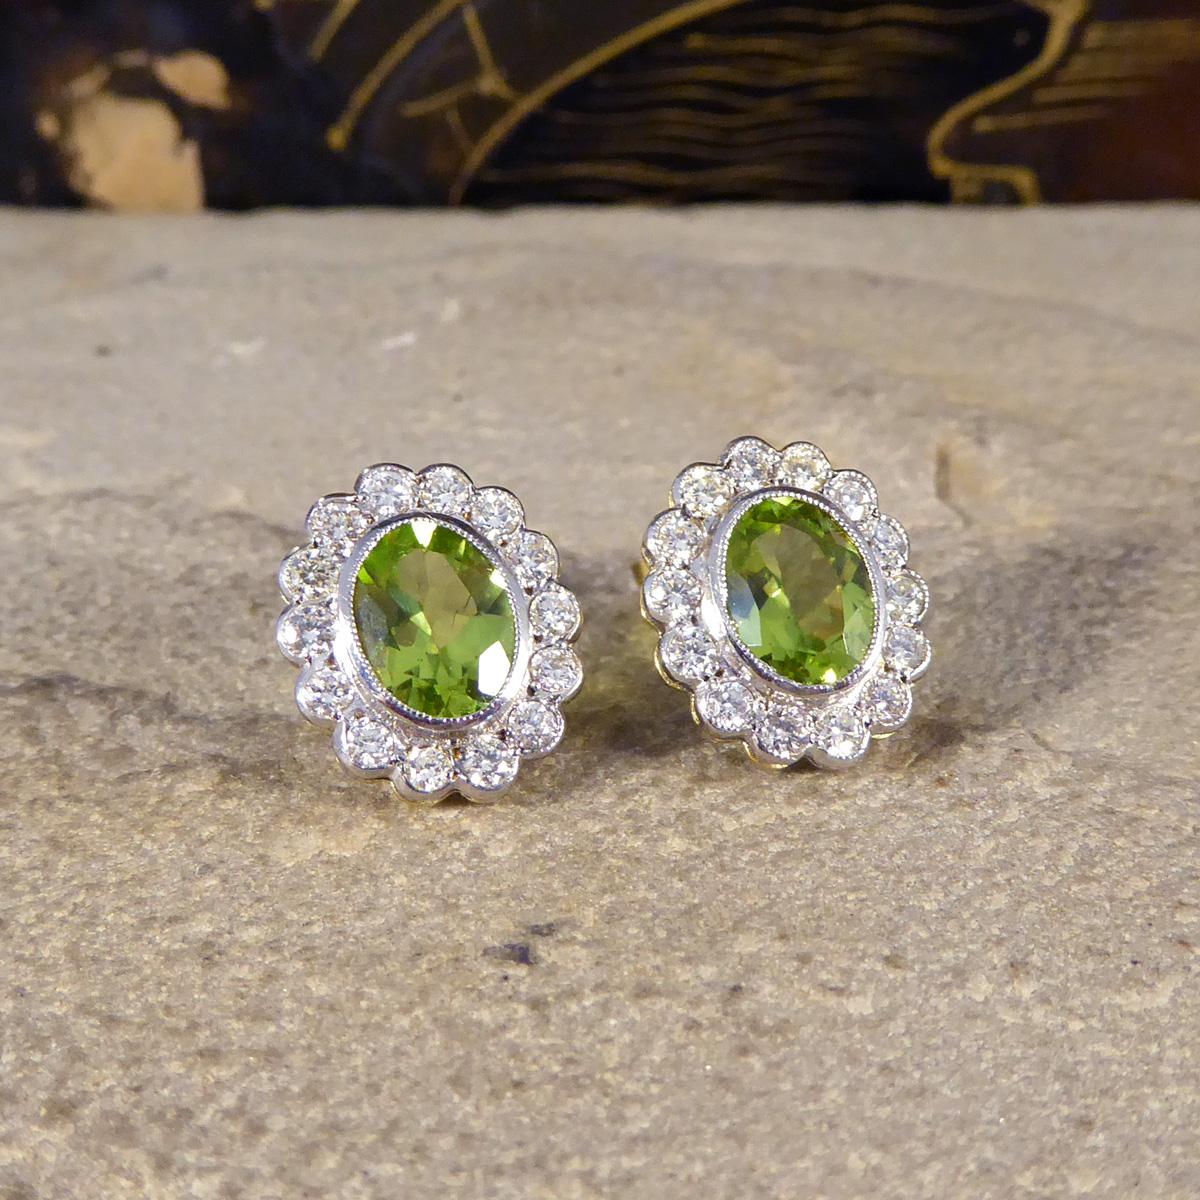 A perfect pair of oval cluster earrings bringing a bright and vibrant Peridot green centre. These earrings feature a 1.25ct Peridot in the core of each stud with a surround of 14 Round Brilliant Cut Diamond weight a total of 0.35ct in each ear. The